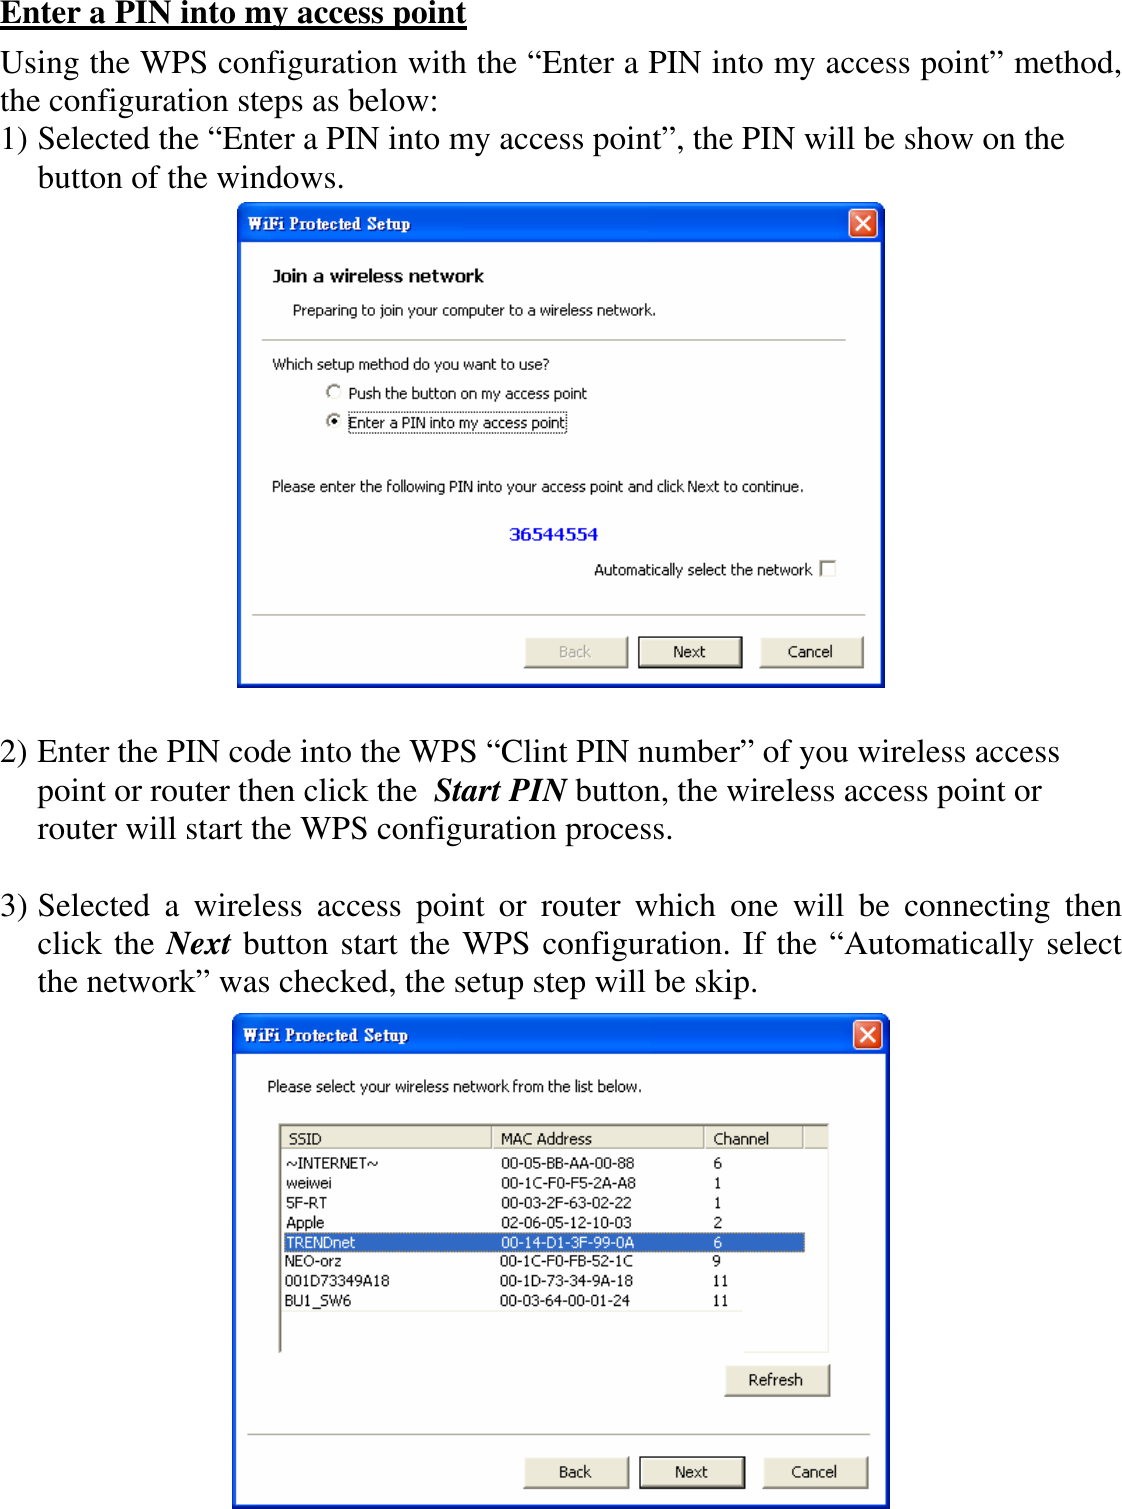   Enter a PIN into my access point Using the WPS configuration with the “Enter a PIN into my access point” method, the configuration steps as below: 1) Selected the “Enter a PIN into my access point”, the PIN will be show on the button of the windows.   2) Enter the PIN code into the WPS “Clint PIN number” of you wireless access point or router then click the  Start PIN button, the wireless access point or router will start the WPS configuration process.  3) Selected  a  wireless  access  point  or  router  which  one  will  be  connecting  then click the Next button start the WPS configuration. If the “Automatically select the network” was checked, the setup step will be skip.  